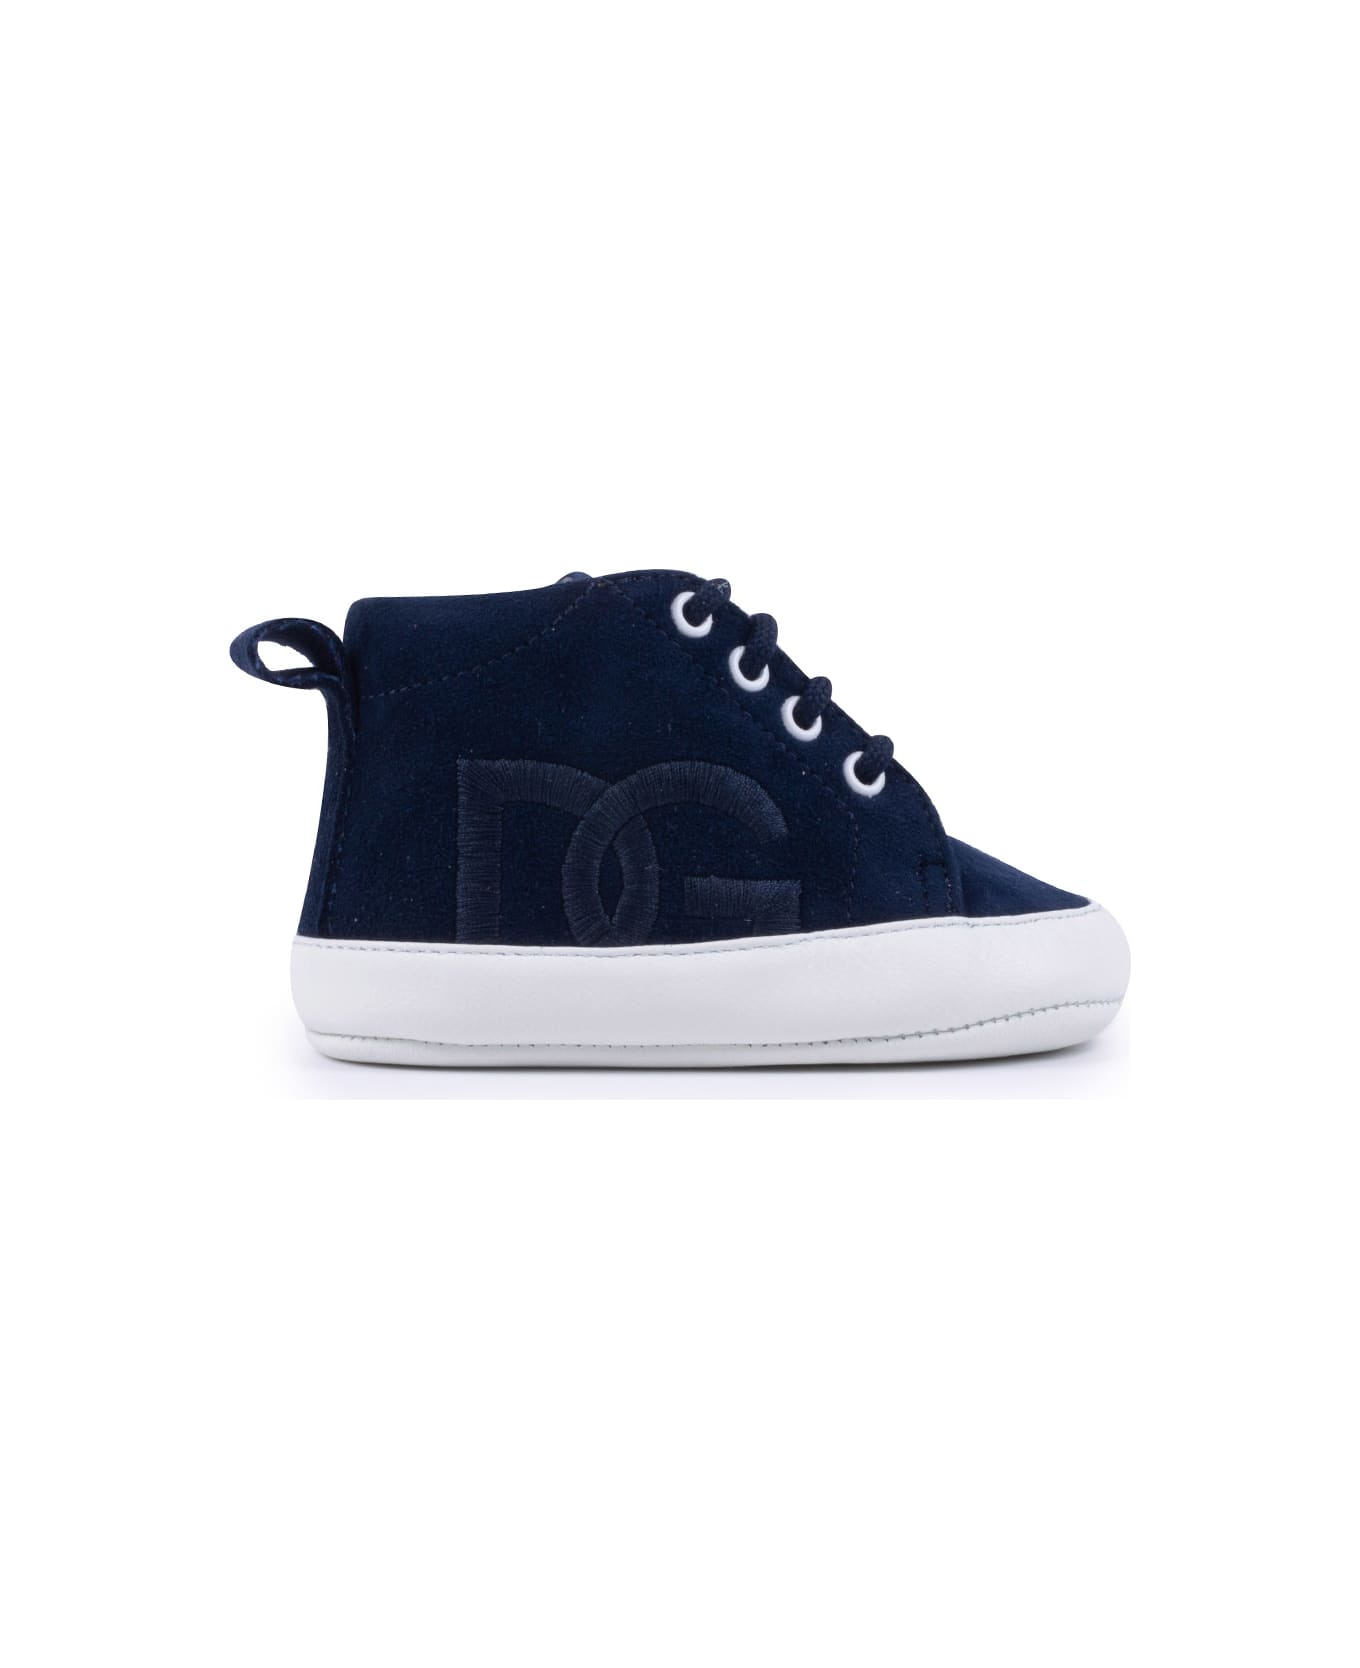 Dolce & Gabbana Suede Sneakers With Dg Logo Embroidery - Blue シューズ